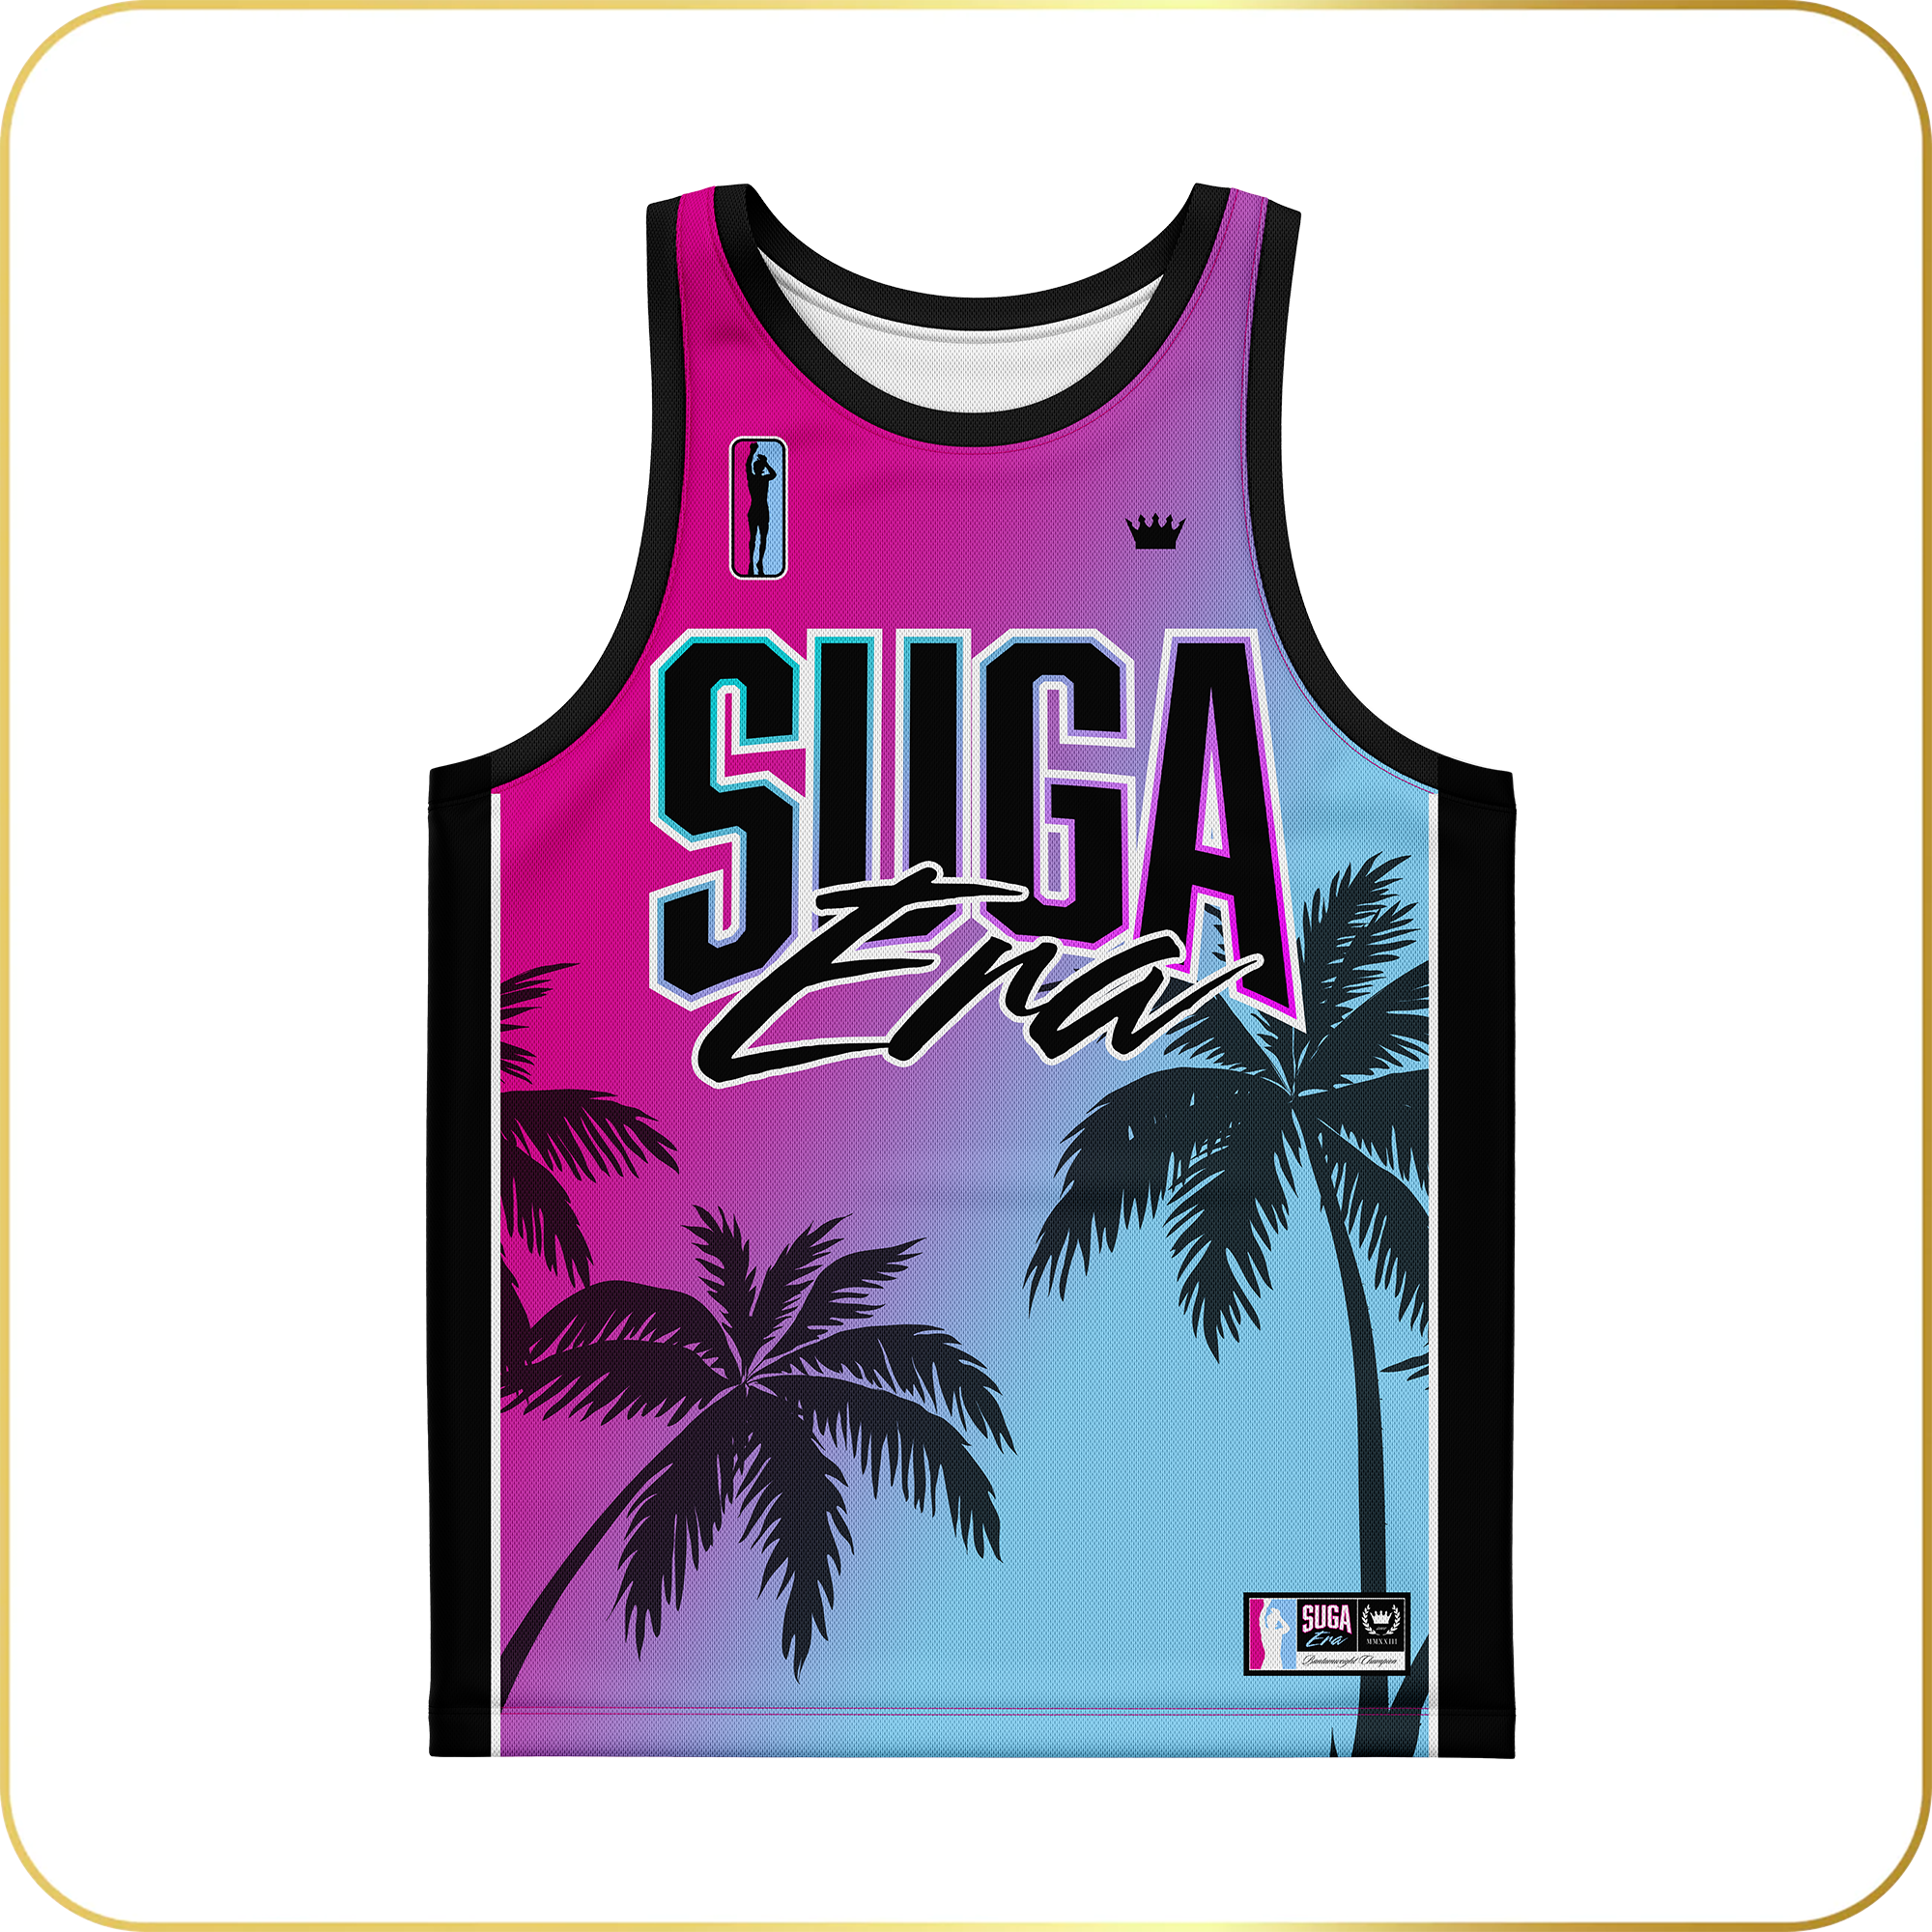 Limited Edition Miami 305 Jersey